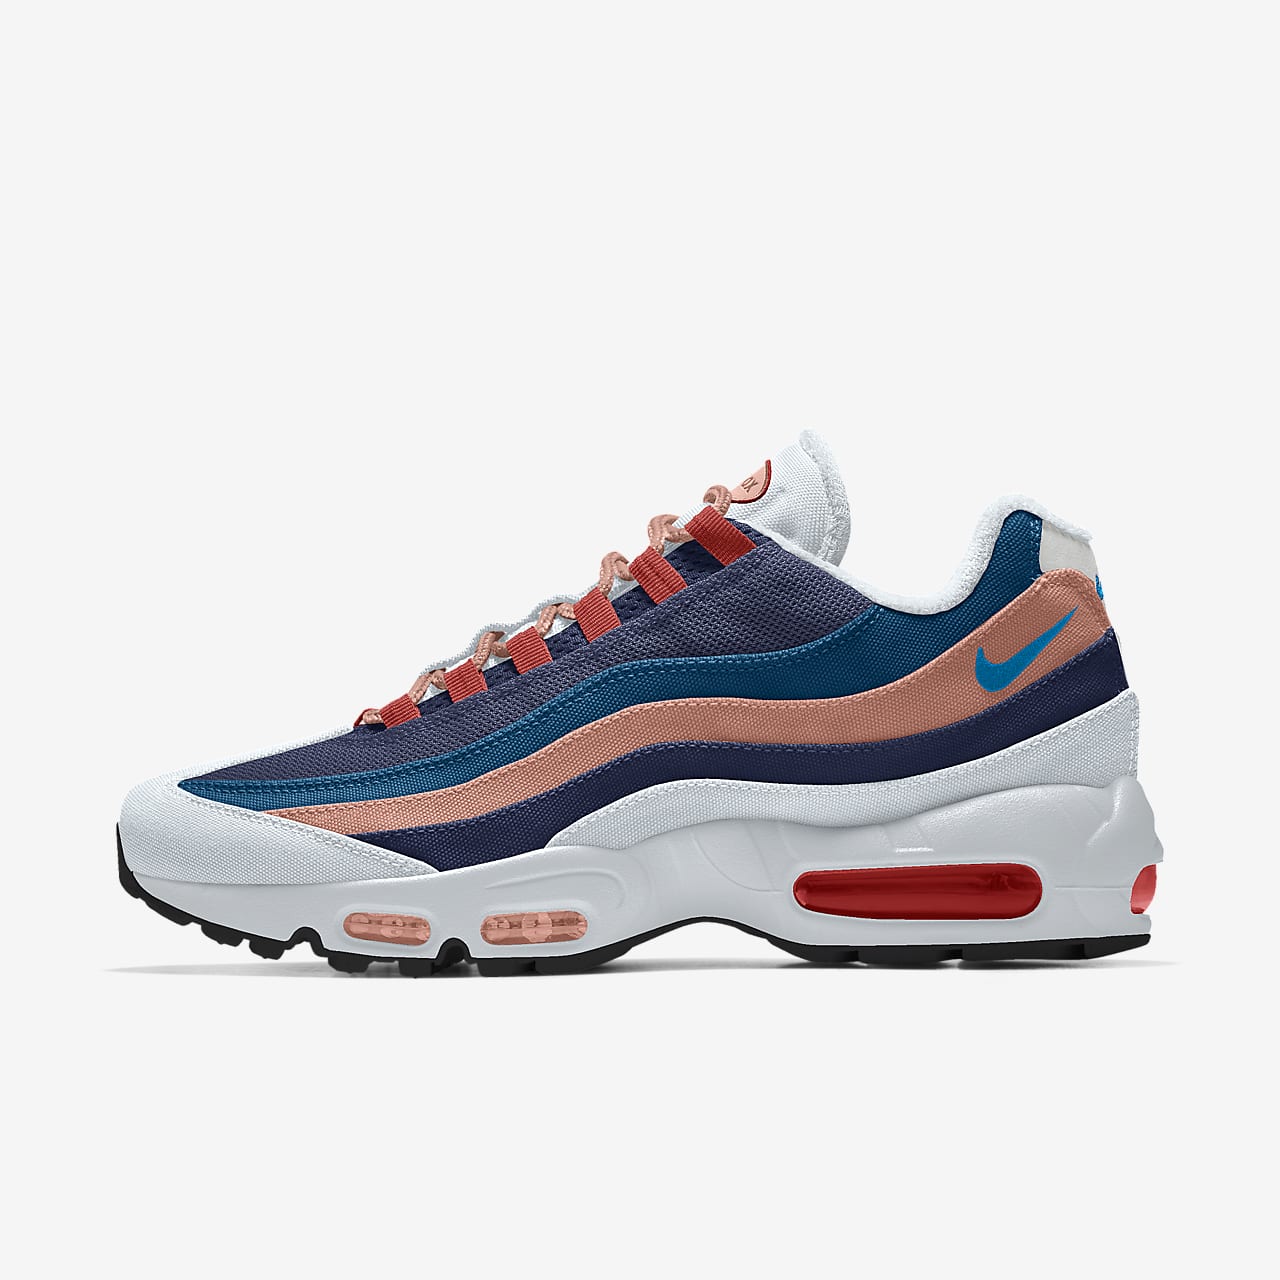 NIKE AIRMAX 95 By you